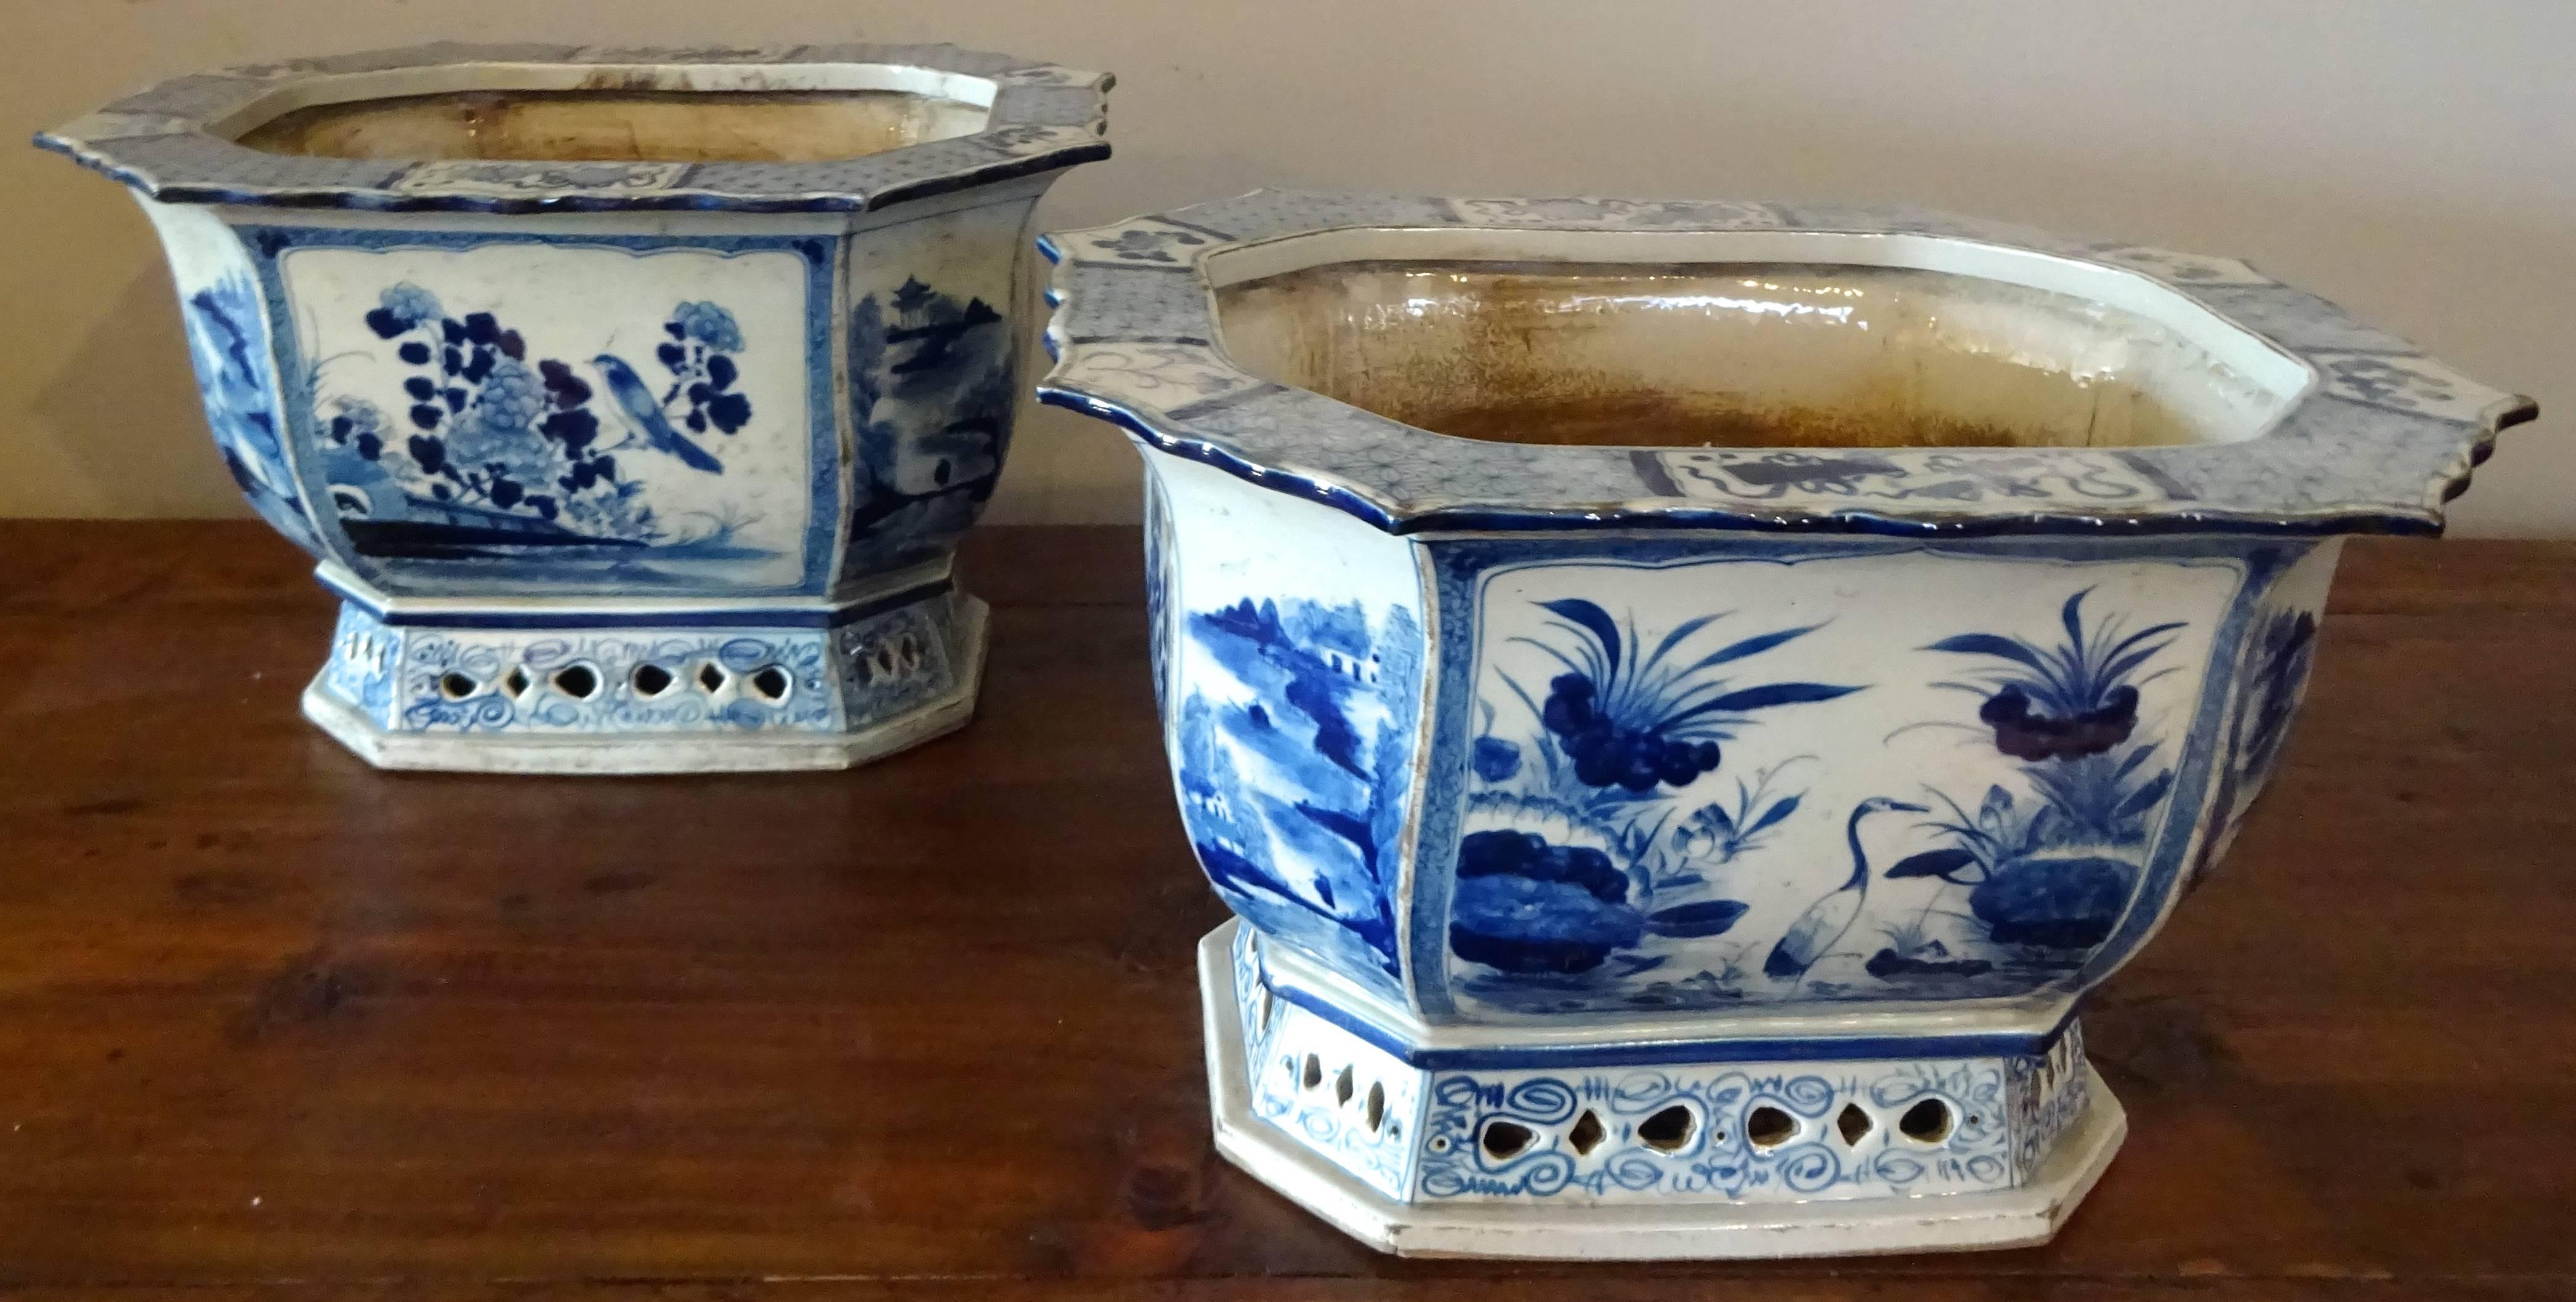 Exquisite pair of porcelain planters, hand-painted in a traditional landscape/floral motif. Octagonal in shape with footed base and drainage hole. These jardinieres come from Jingdezhen, China where the imperial kilns were once located.